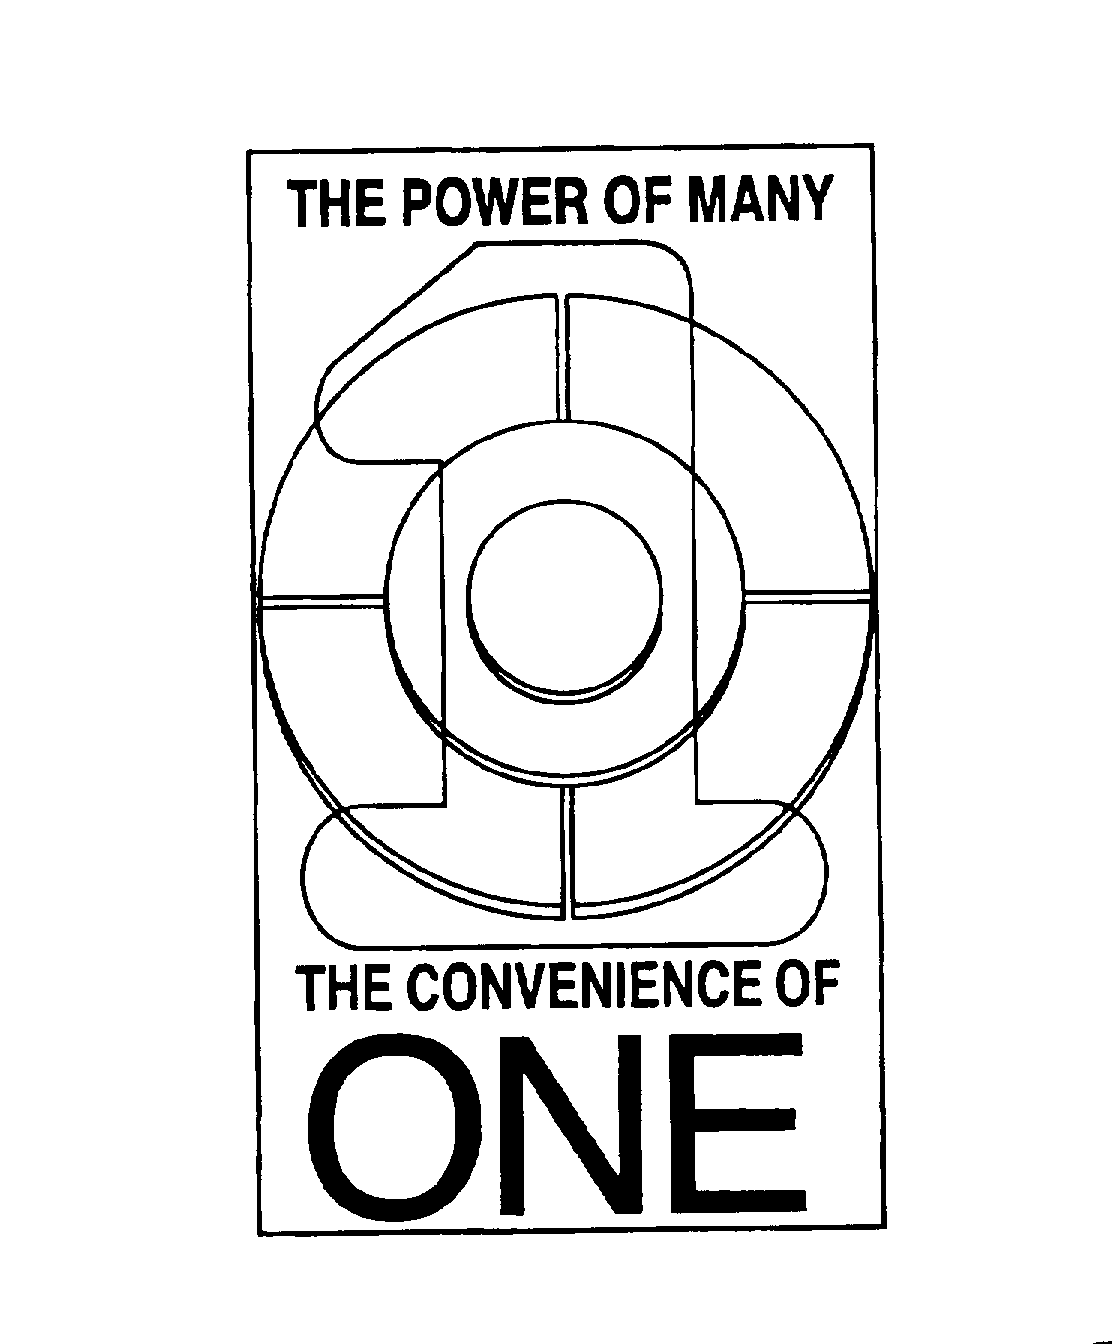  THE POWER OF MANY THE CONVENIENCE OF ONE